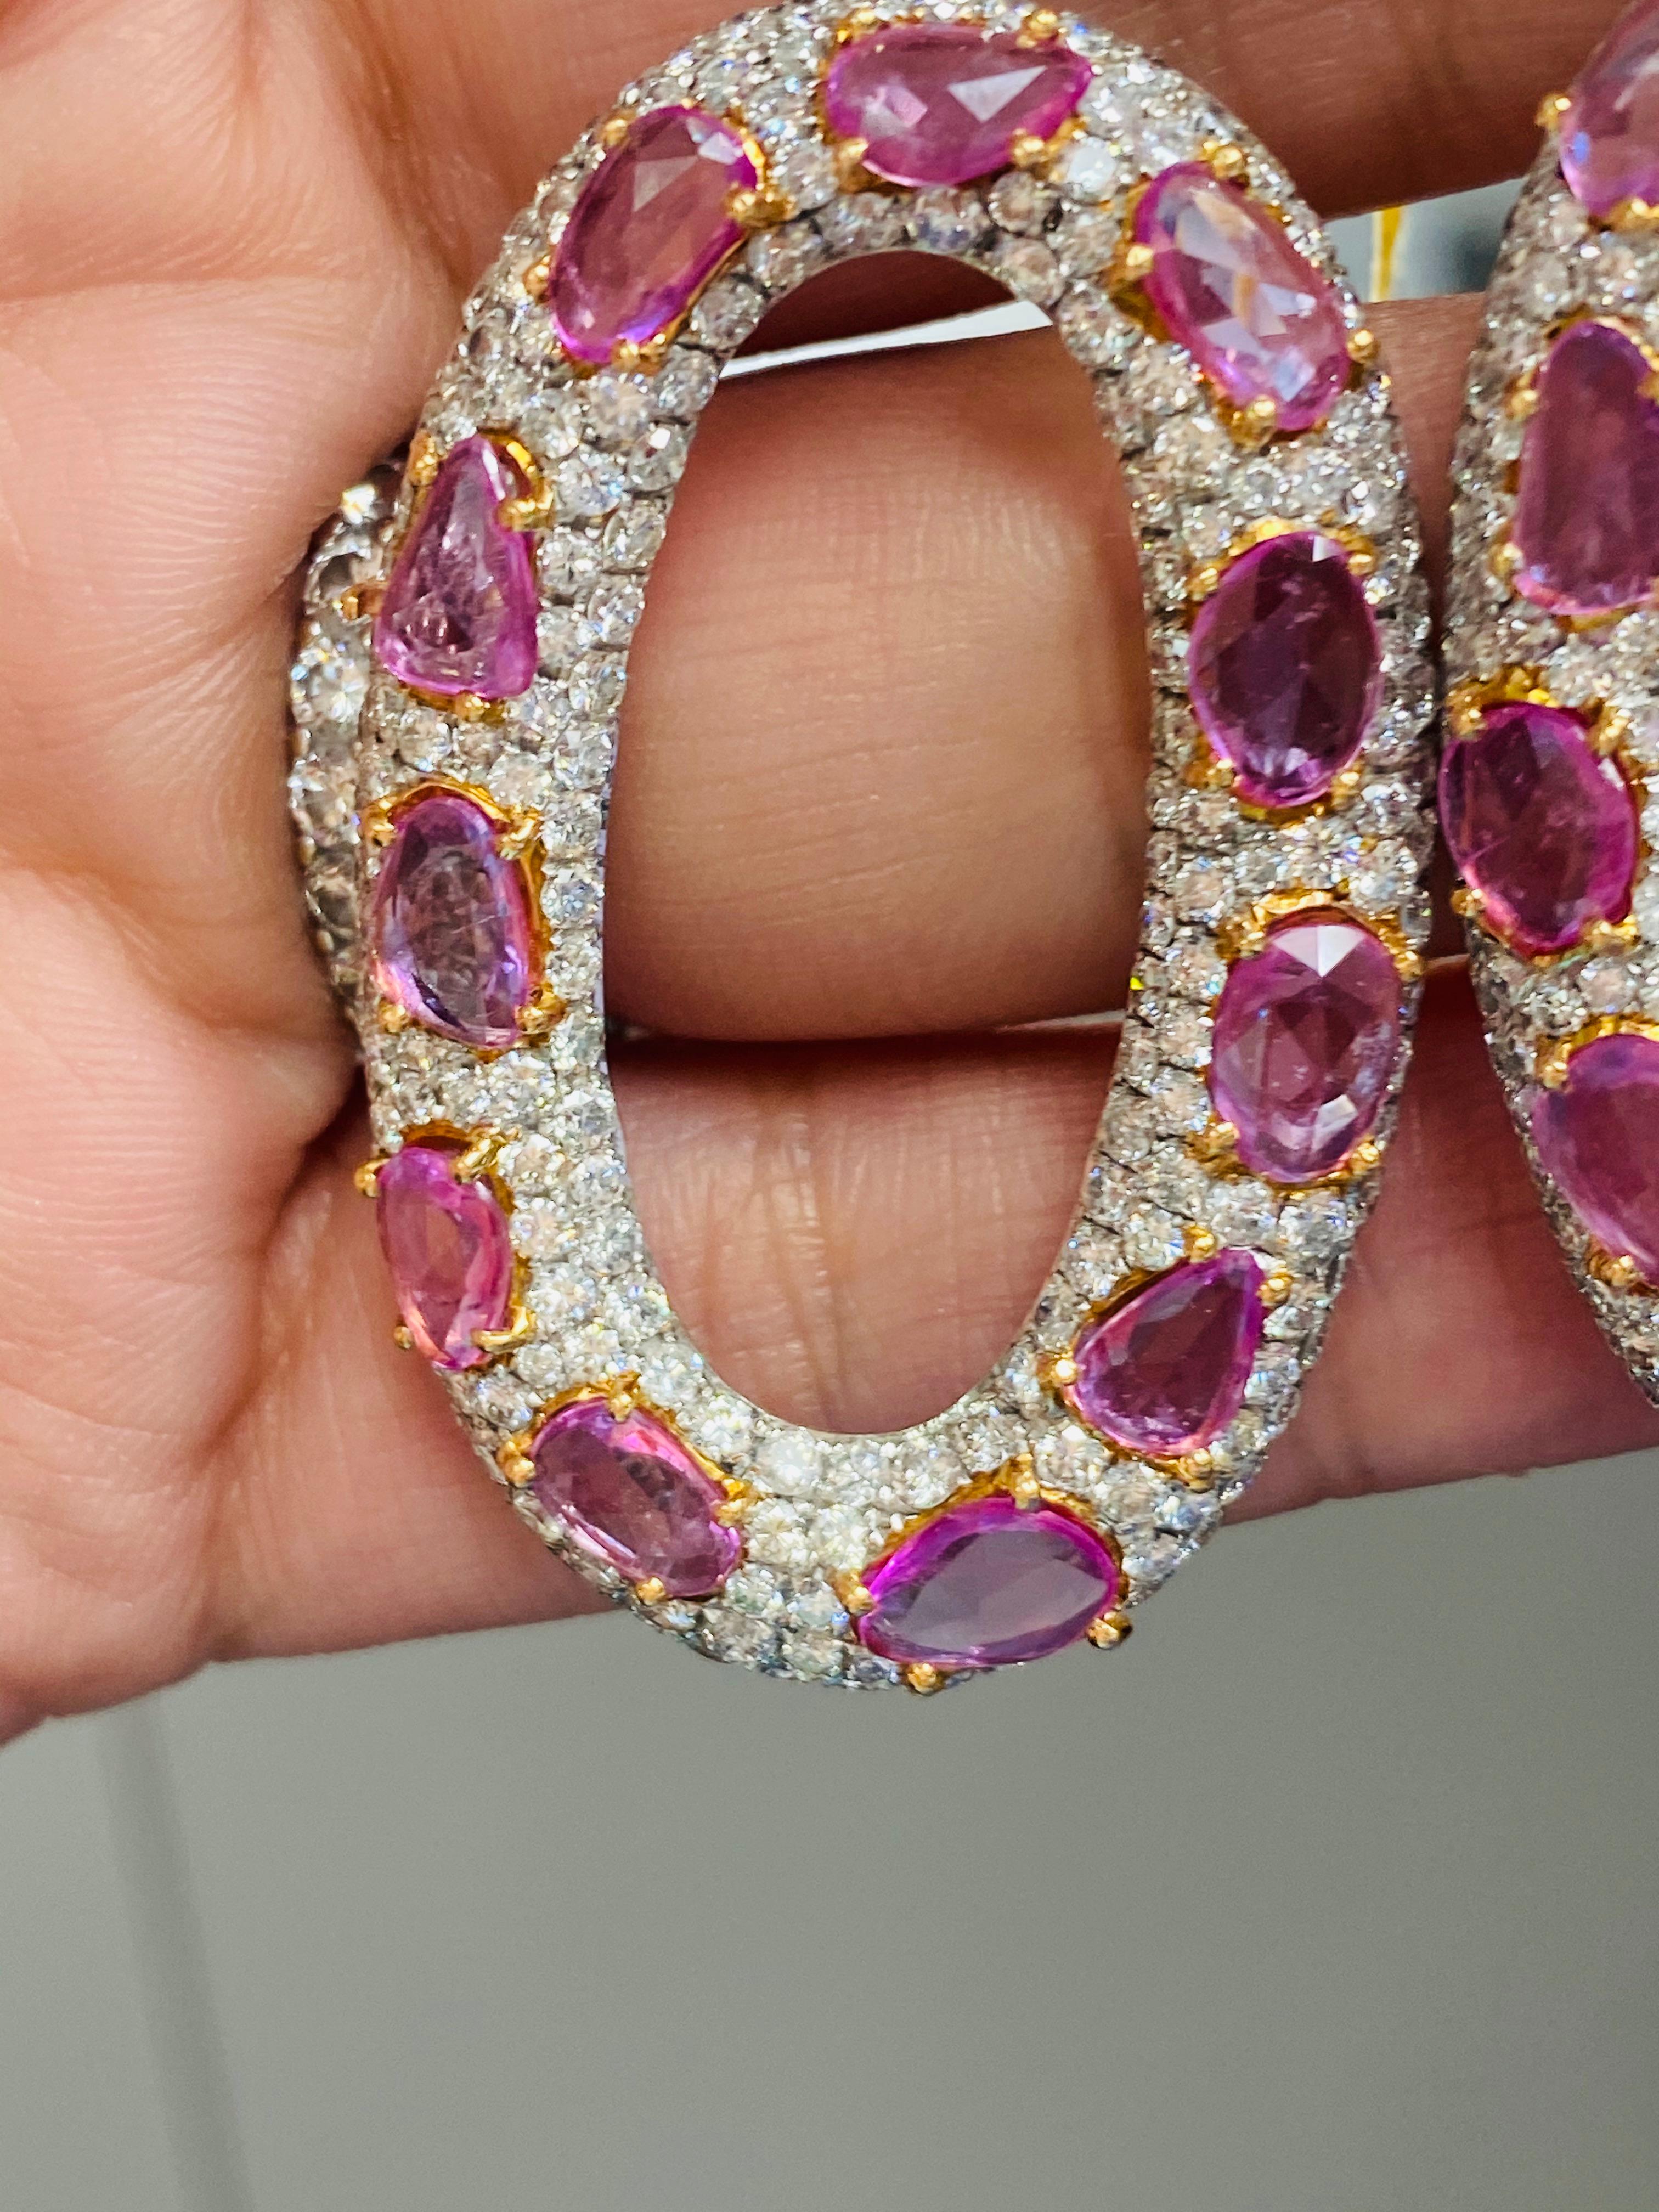 Women's Spectacular 12.62 Carat Pink Sapphire and Diamond Earrings For Sale